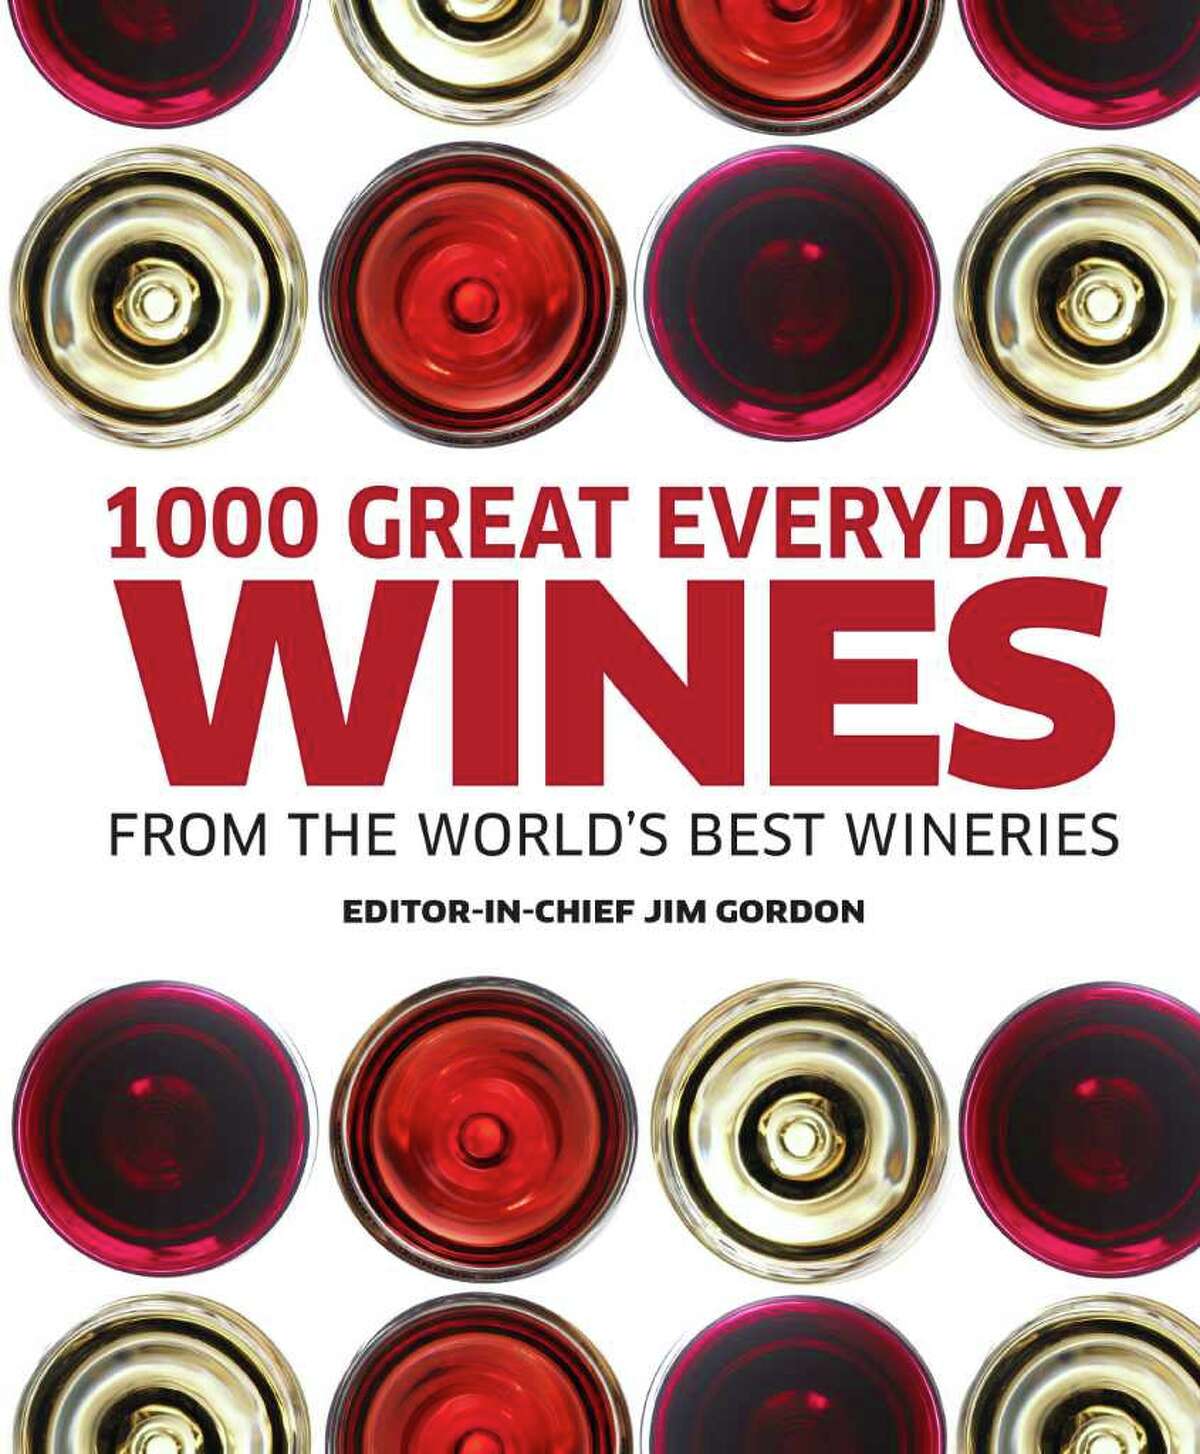 1000 Great Everyday Wines by Jim Gordon